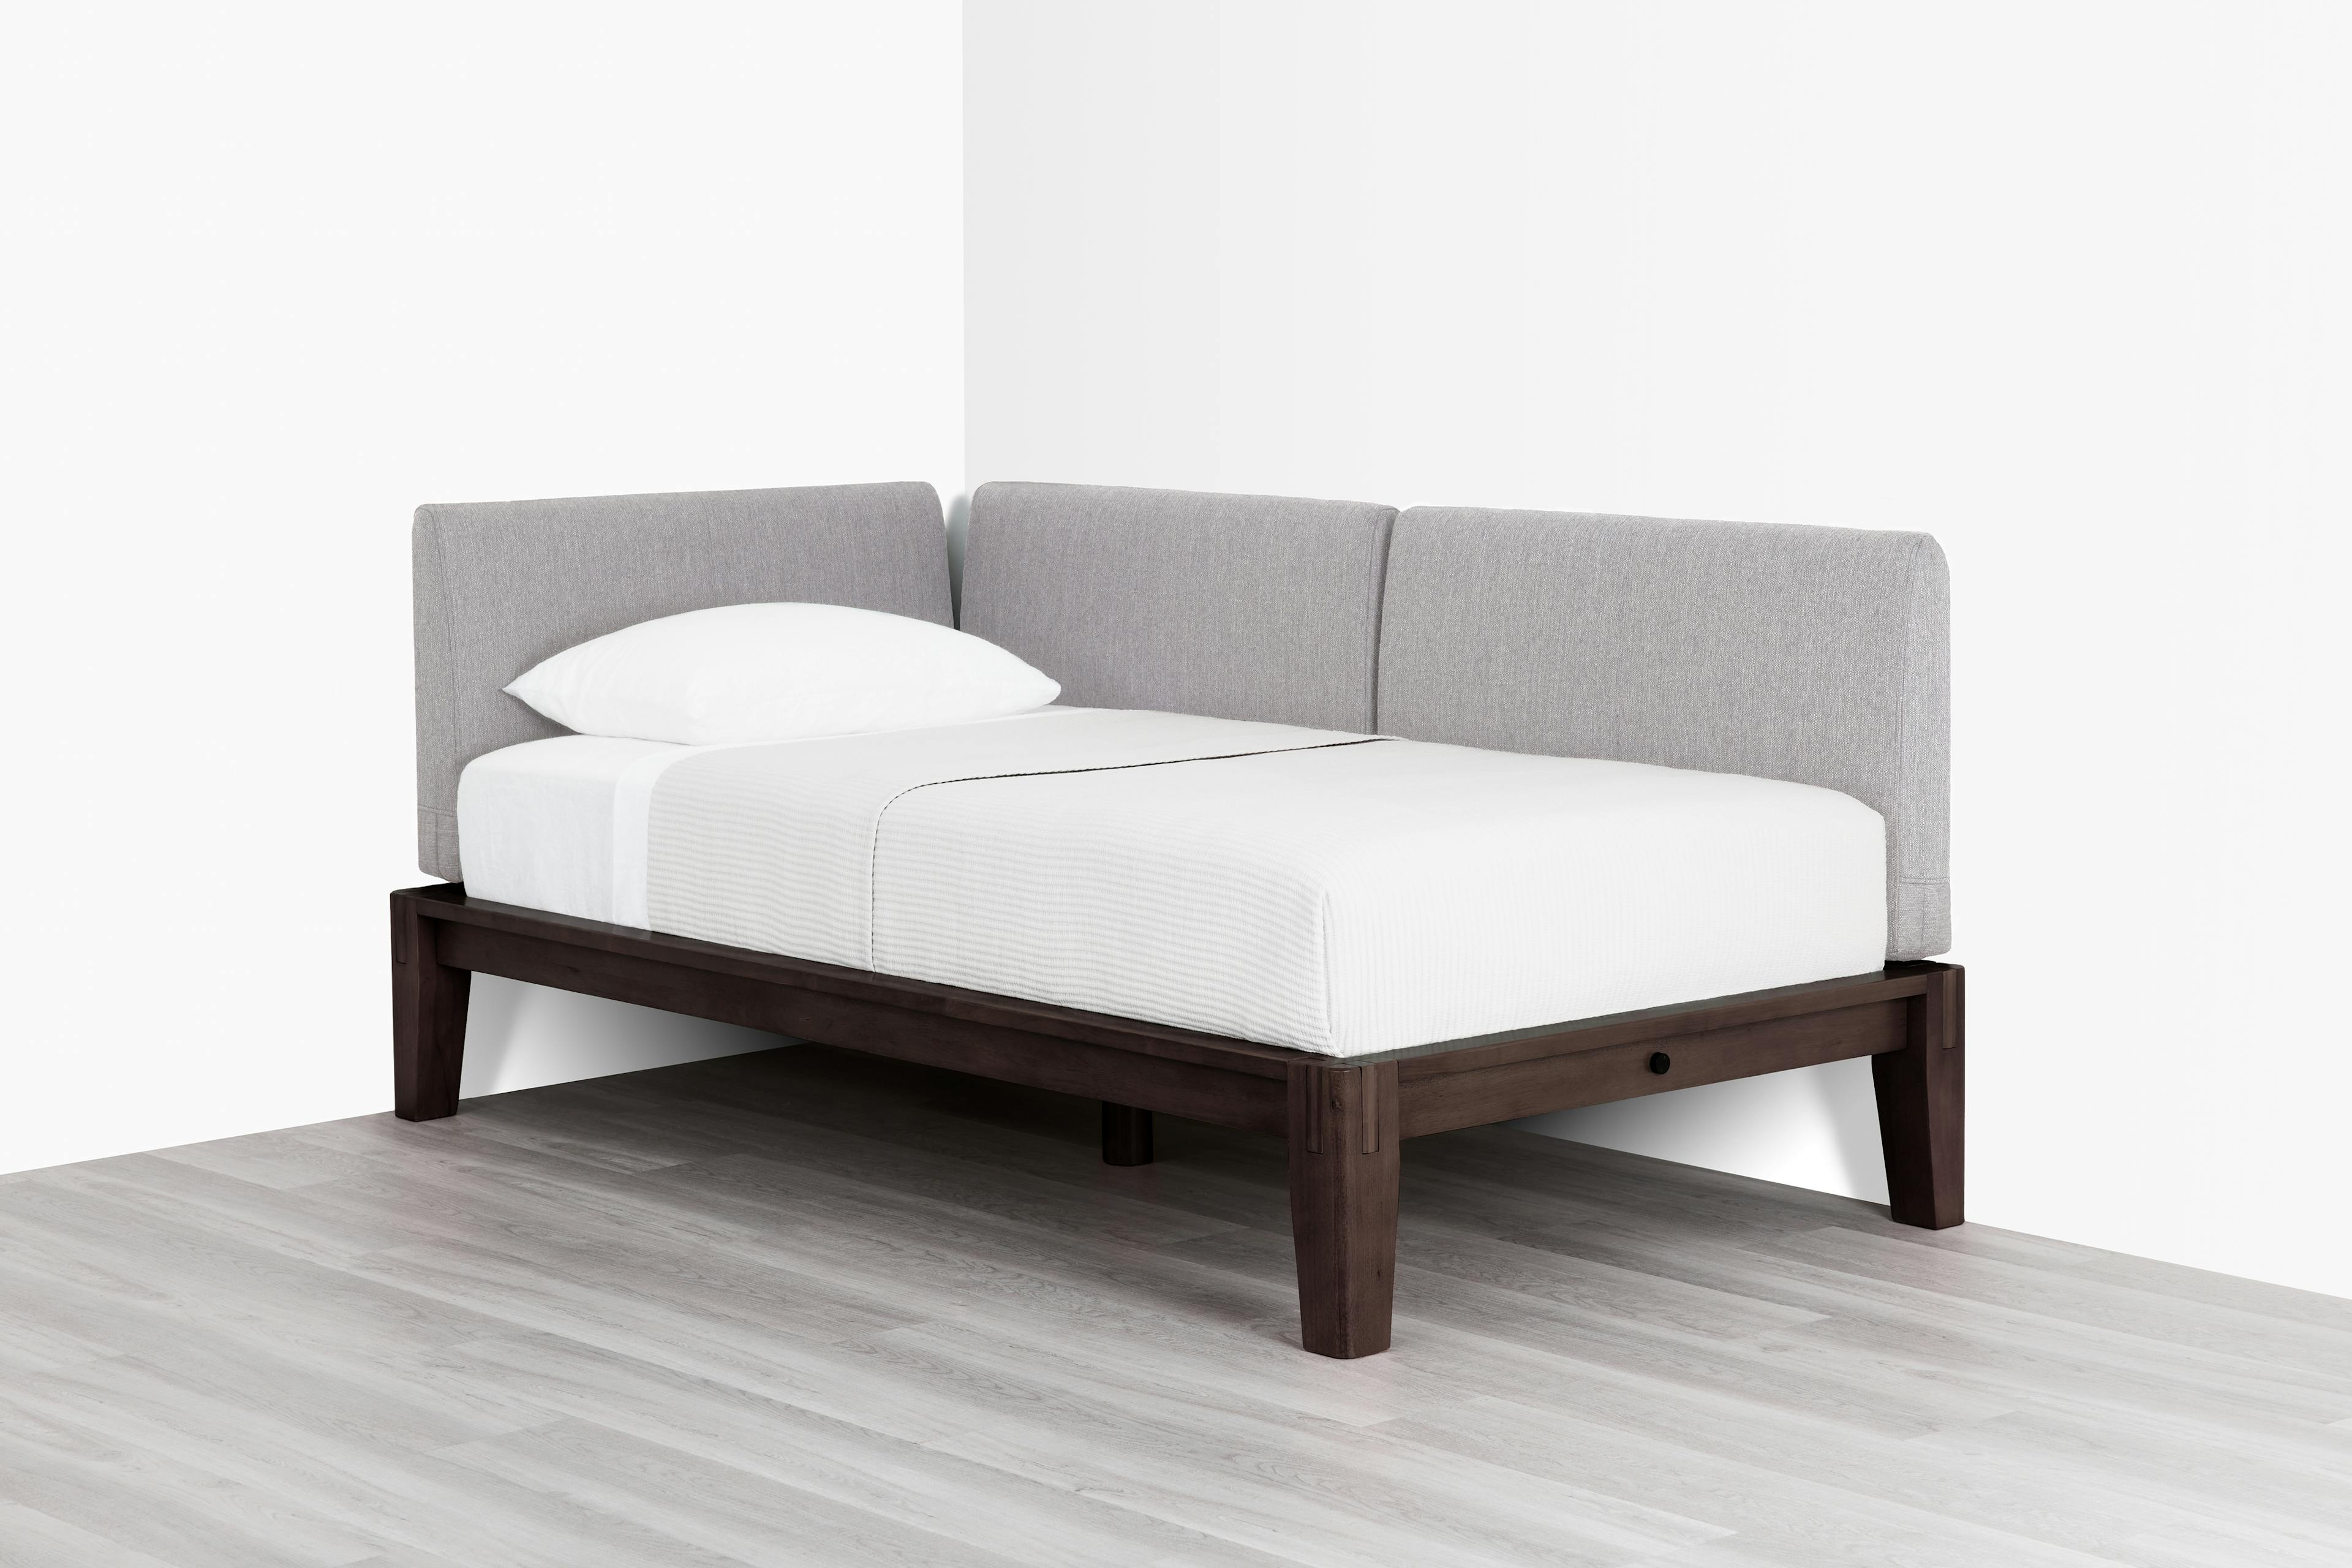 PDP Image: The Daybed (Espresso / Fog Grey) - 3:2 - Front